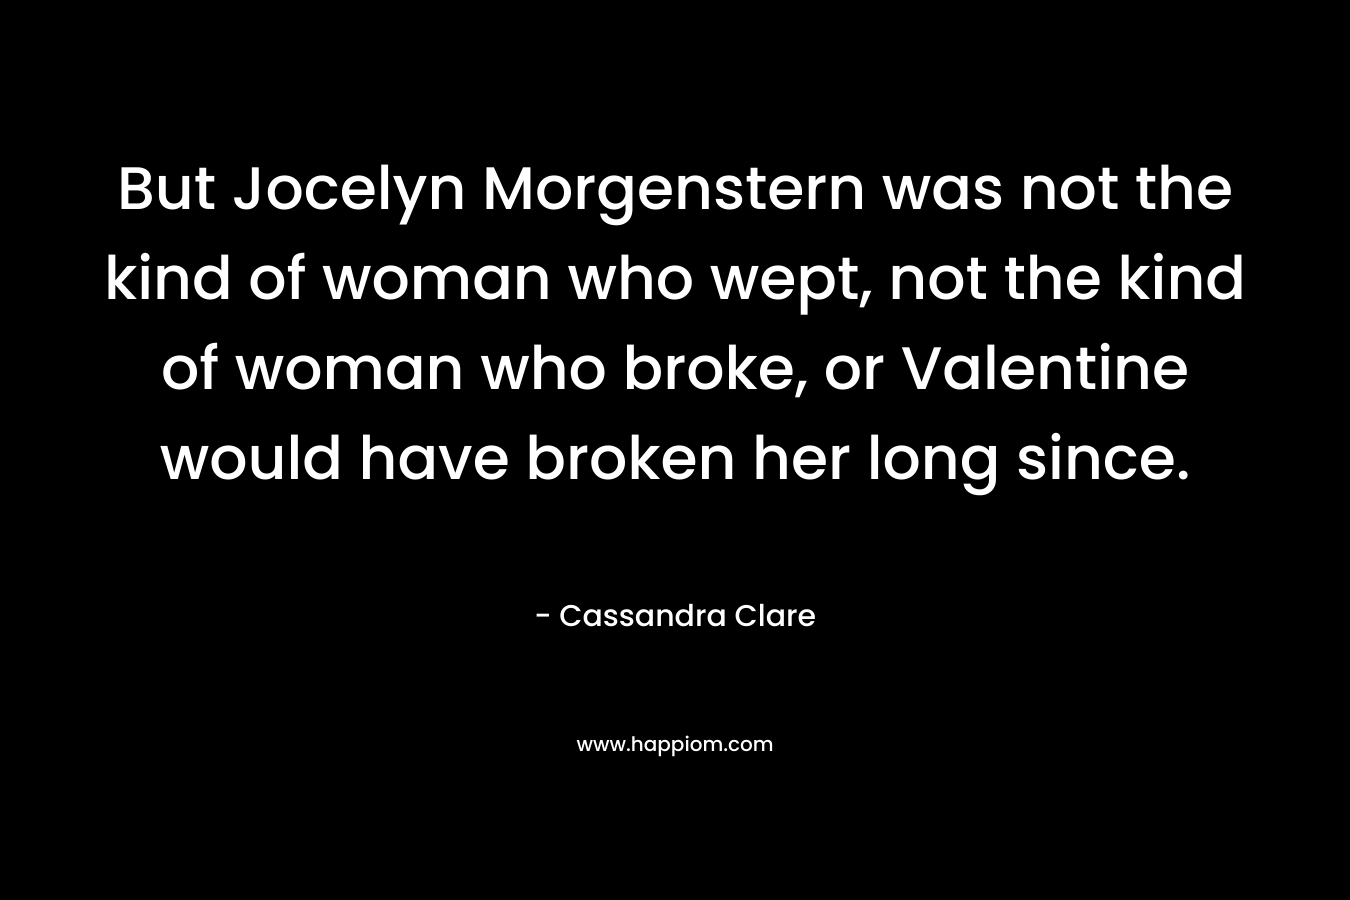 But Jocelyn Morgenstern was not the kind of woman who wept, not the kind of woman who broke, or Valentine would have broken her long since. – Cassandra Clare